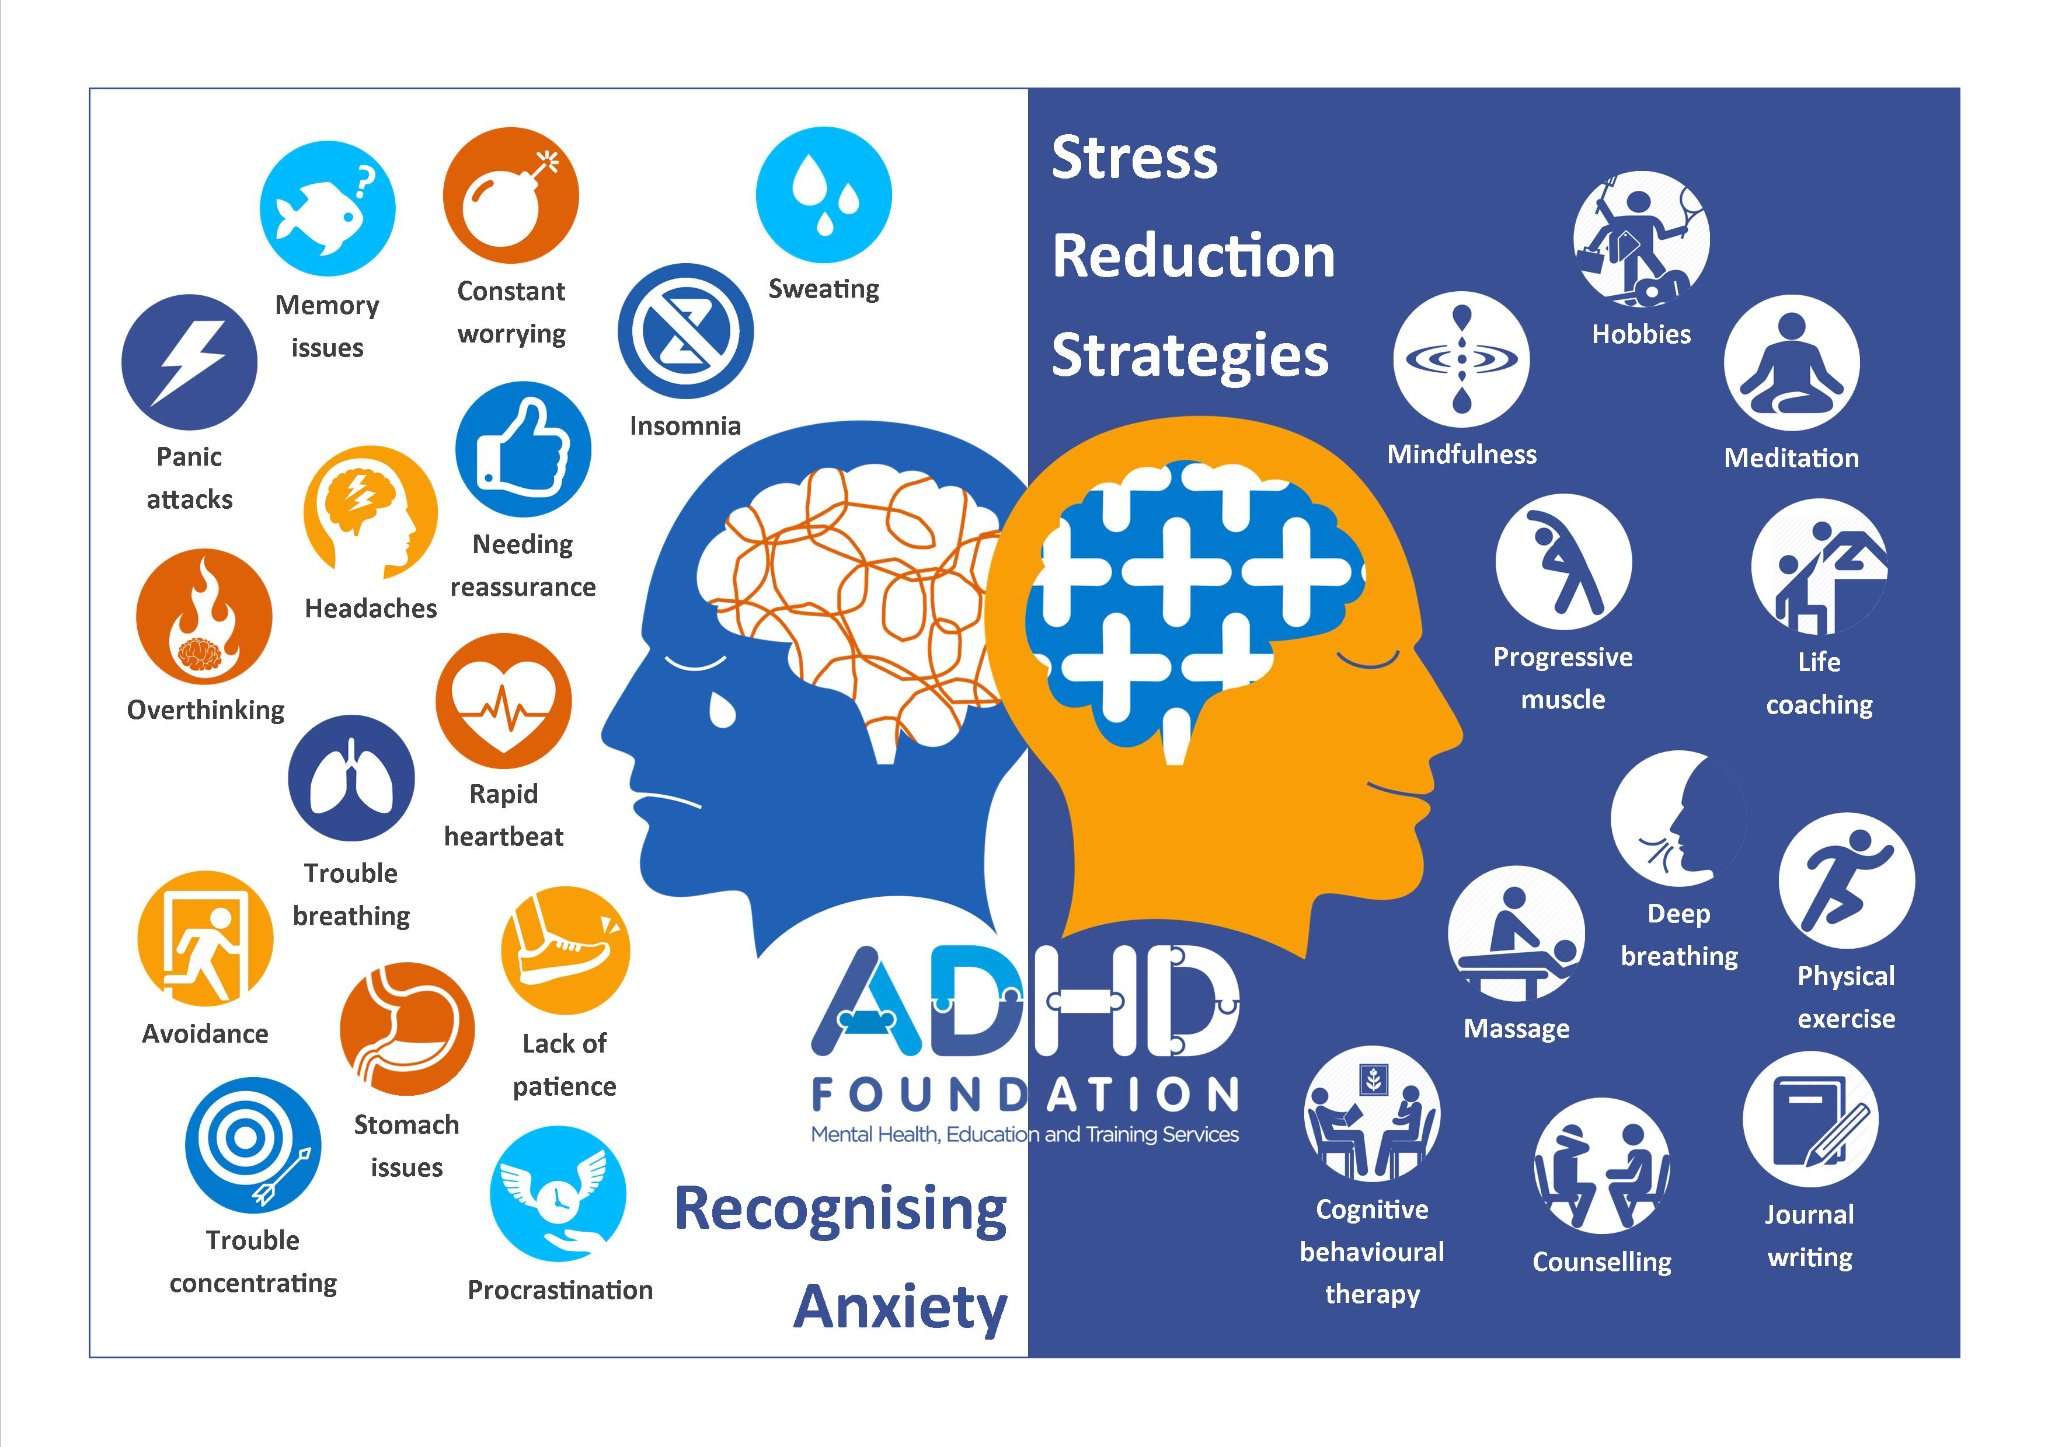 Attention deficit hyperactivity disorder (ADHD)